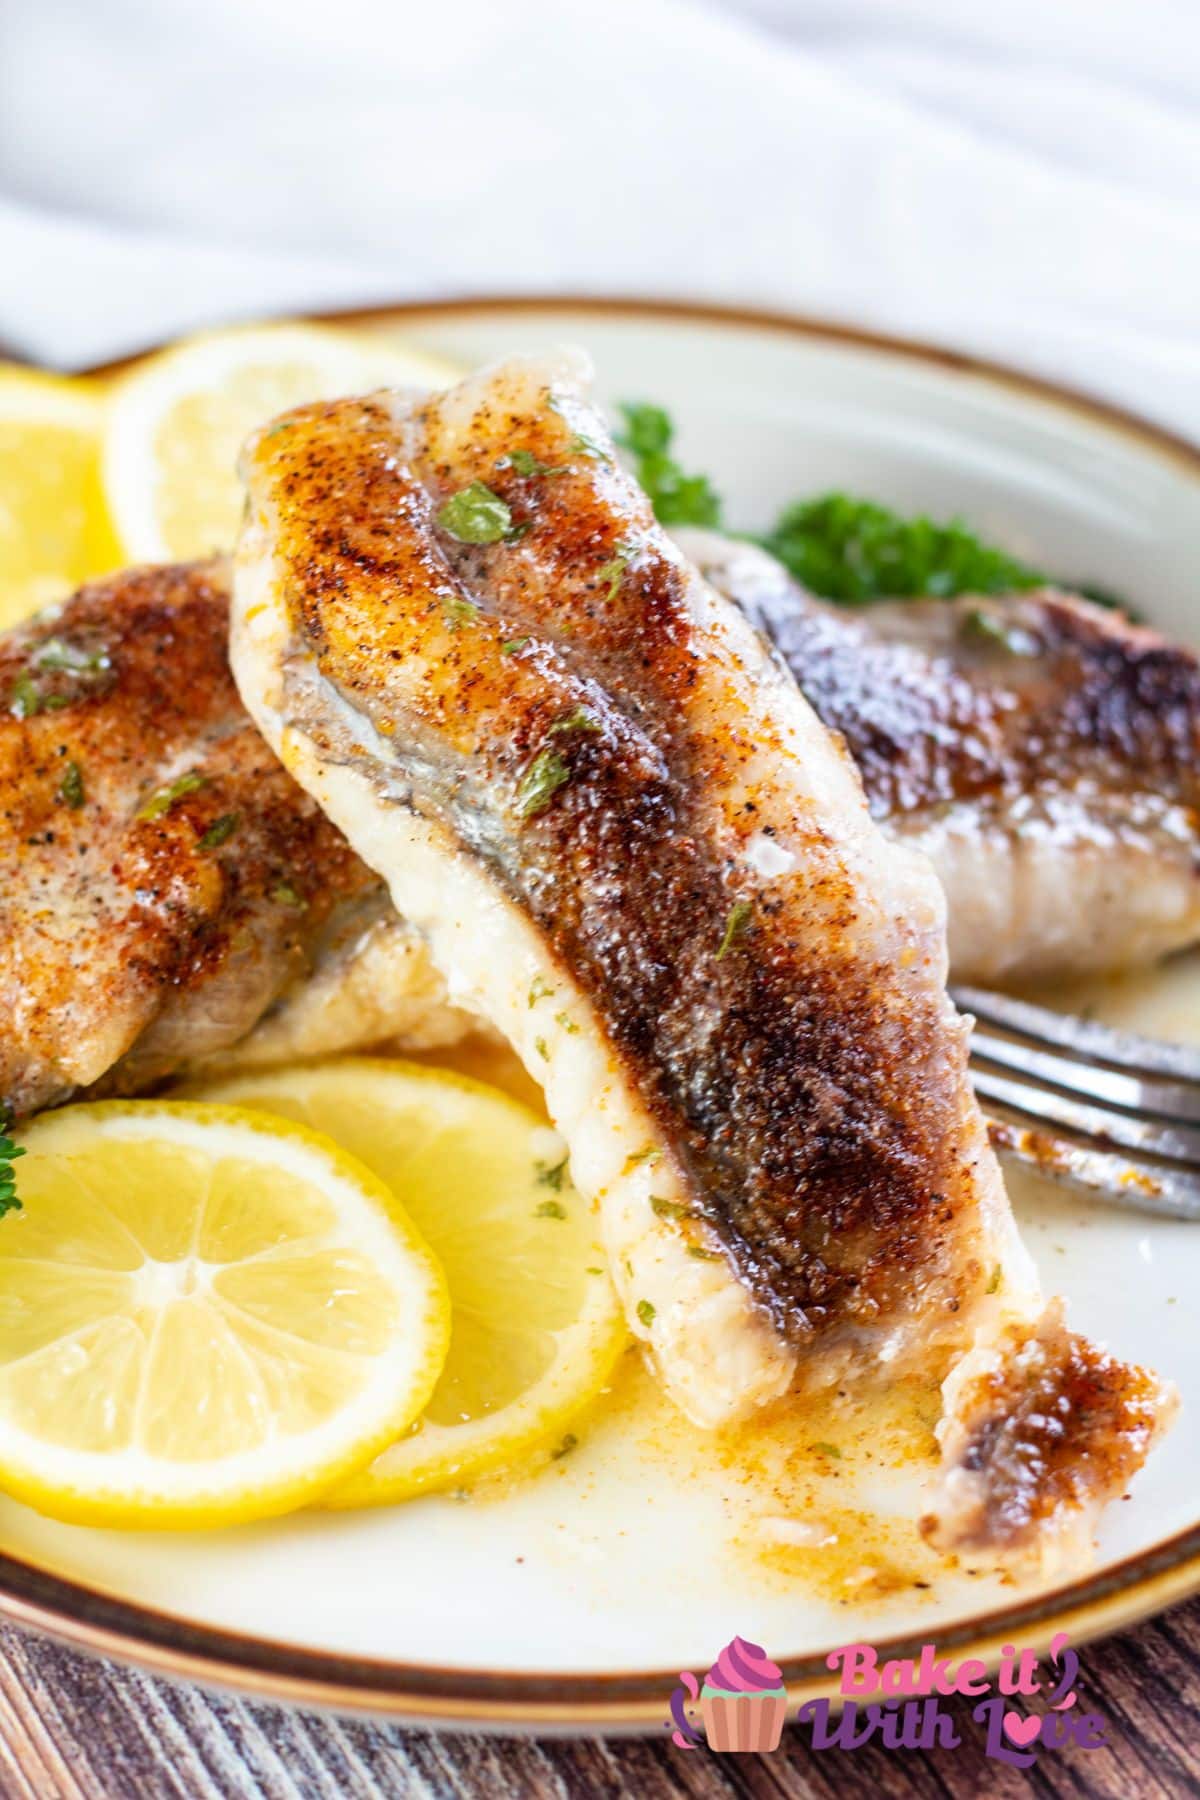 Tall image of baked monkfish on a plate with lemon slices.